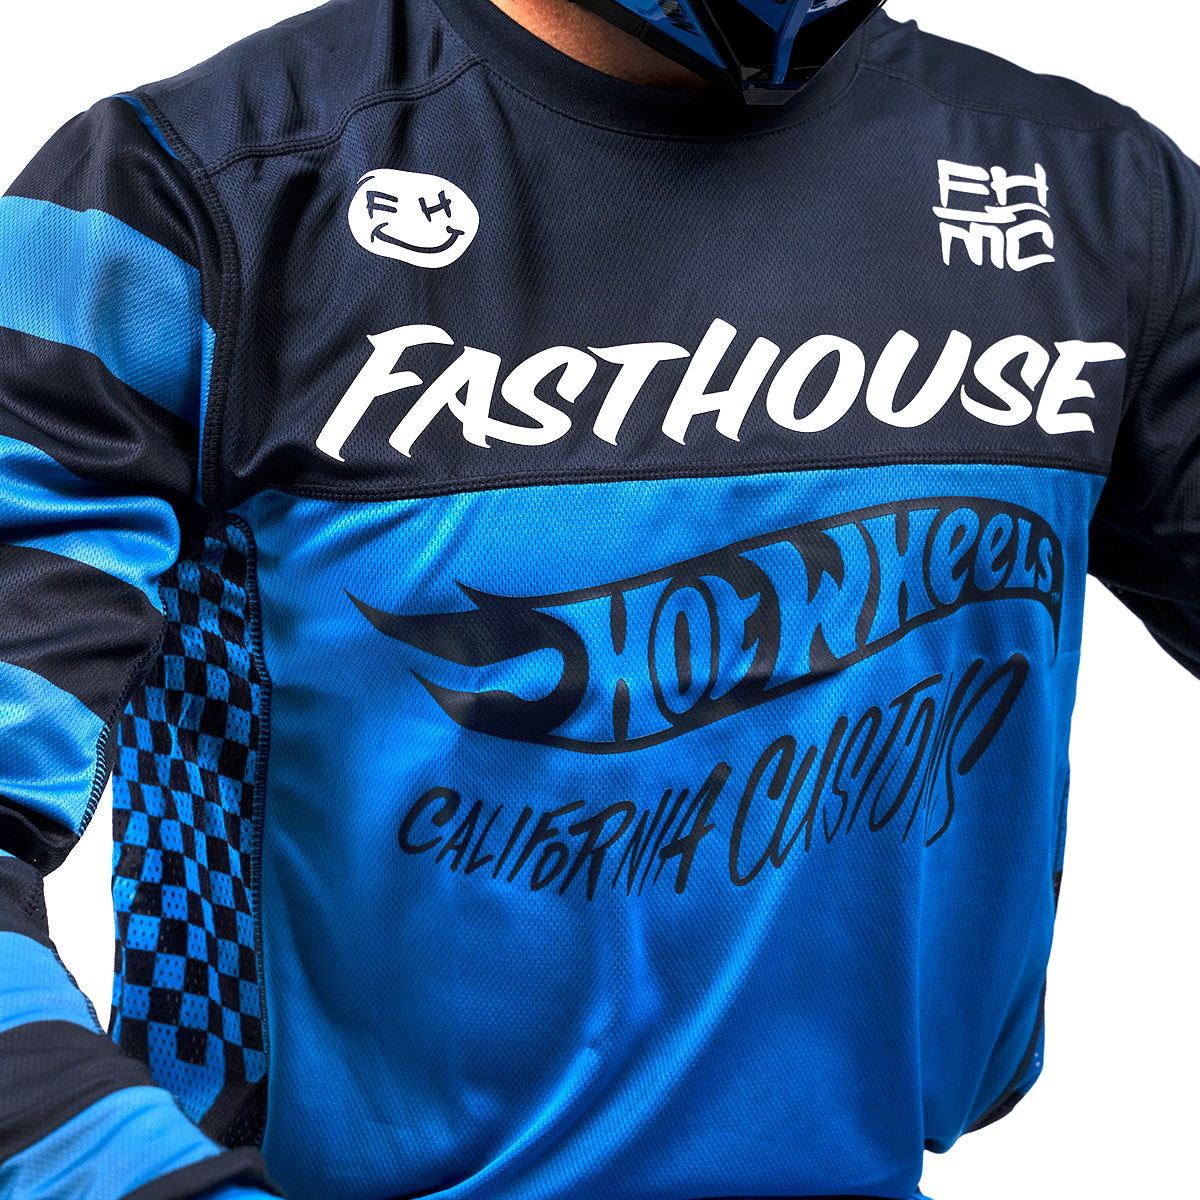 Hot Wheels Grindhouse Jersey - Electric Blue